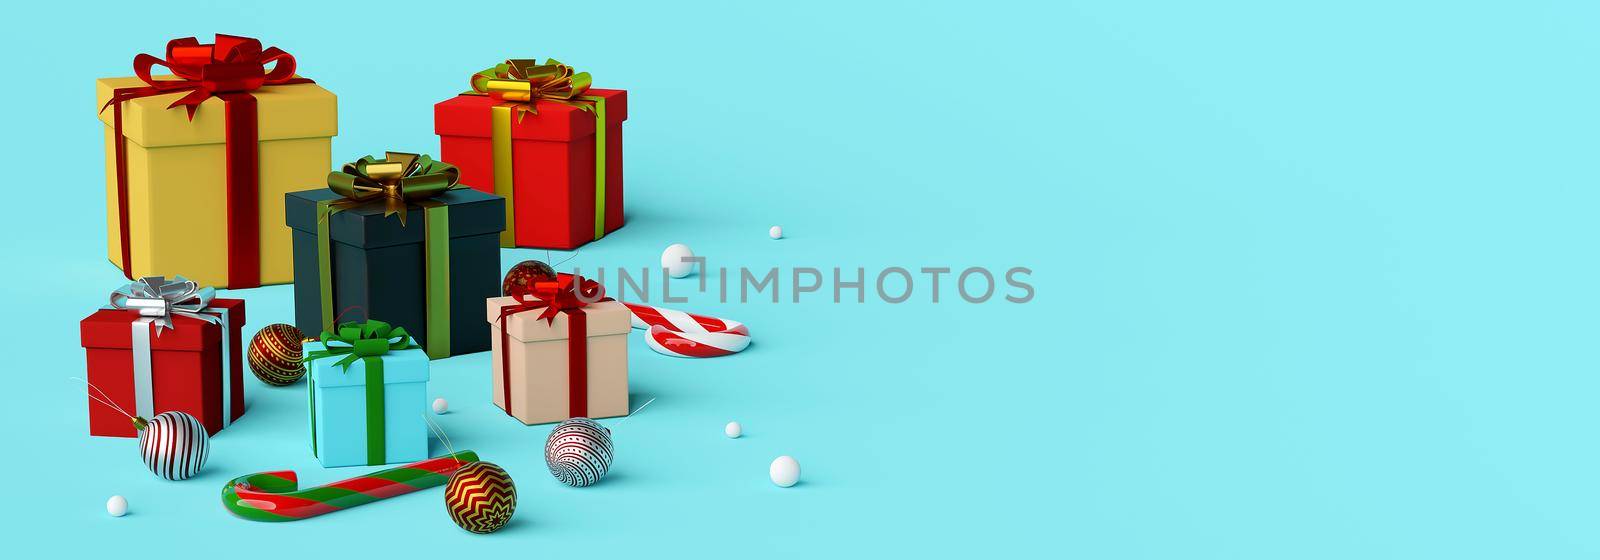 Christmas banner background of Christmas gifts and decoration, 3d rendering by nutzchotwarut